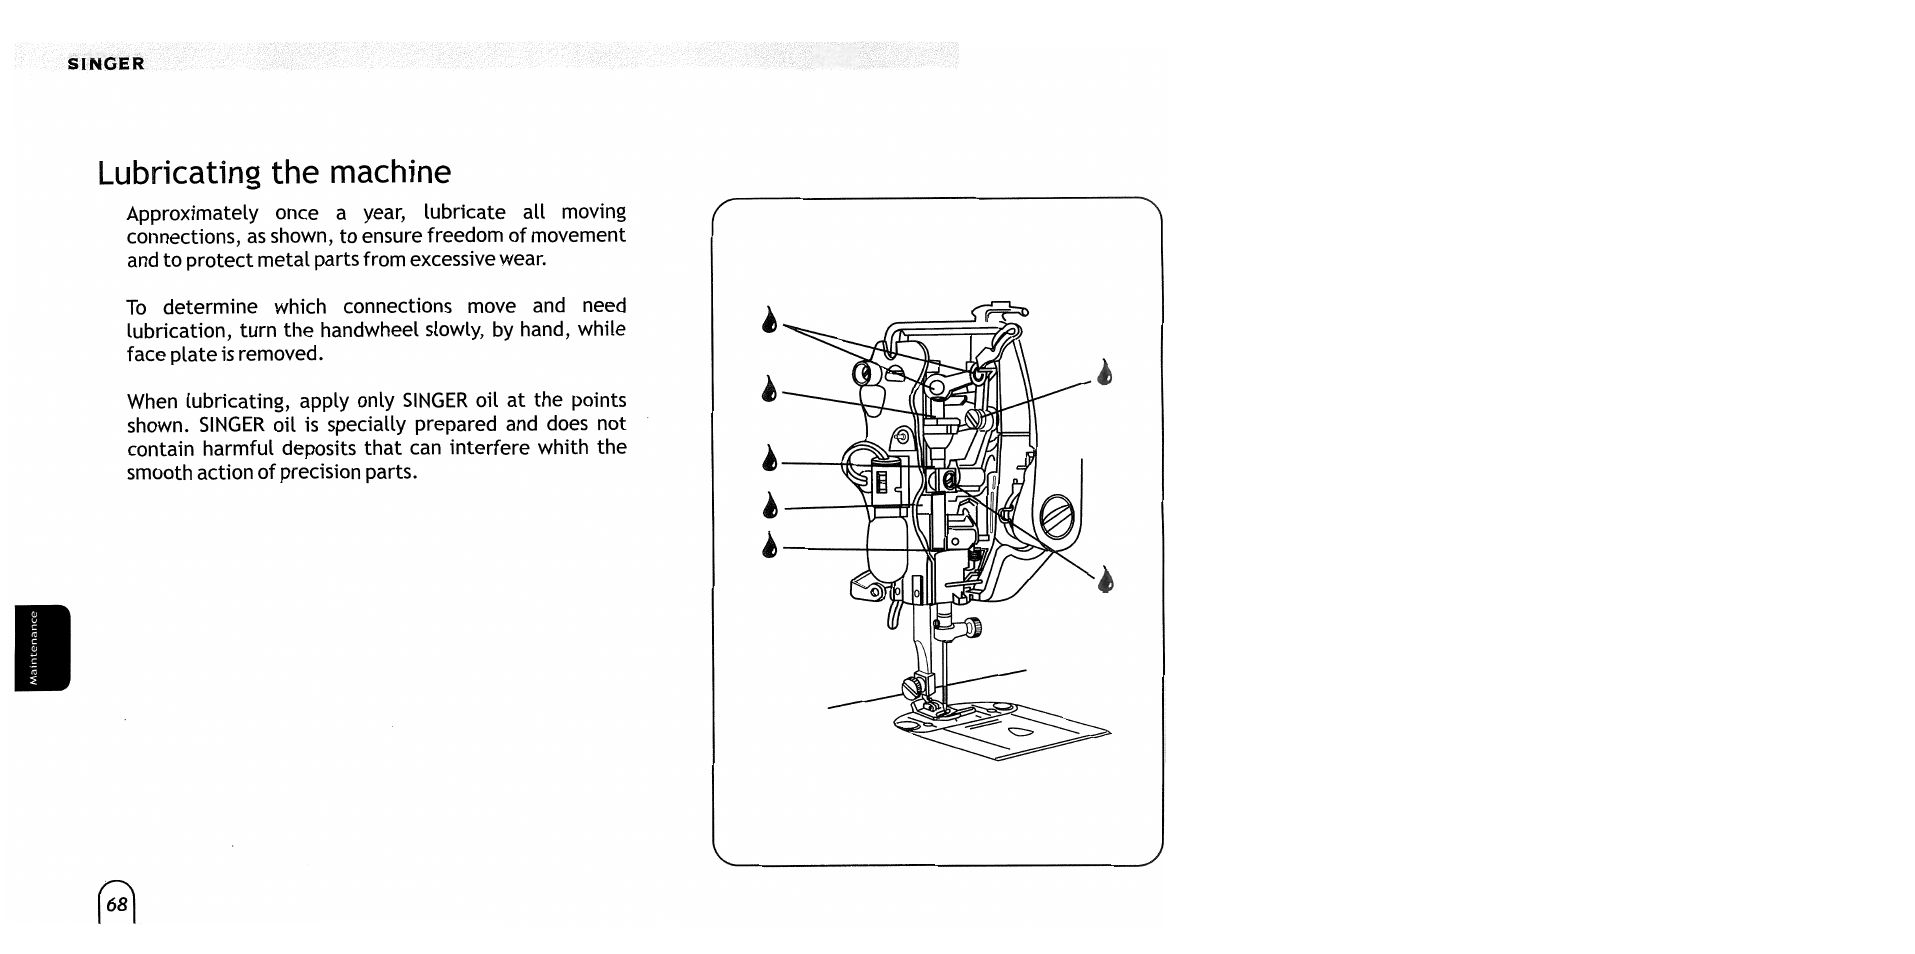 Lubricating the machine, Cleaning the machine, Sìncer | SINGER 2517 Merritt User Manual | Page 70 / 80